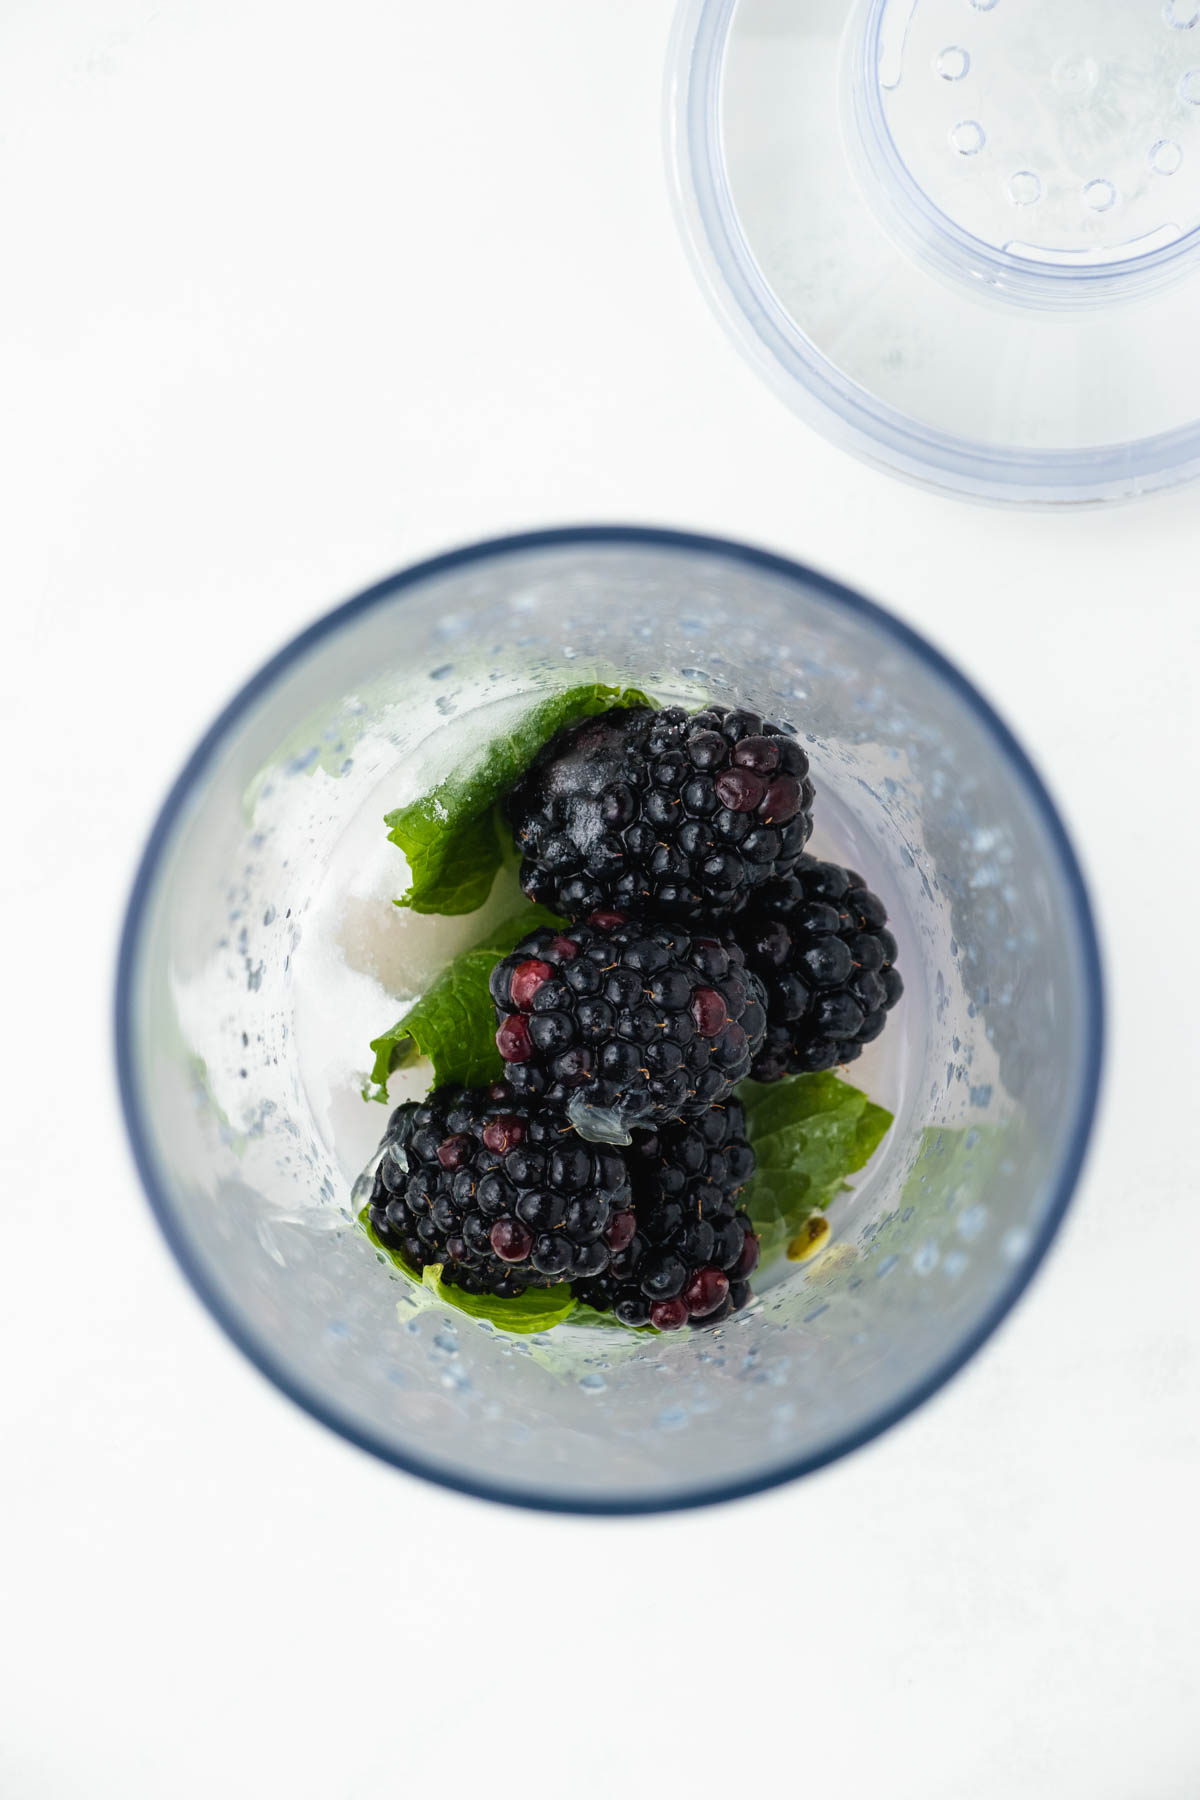 A glass with blackberries and mint leaves.